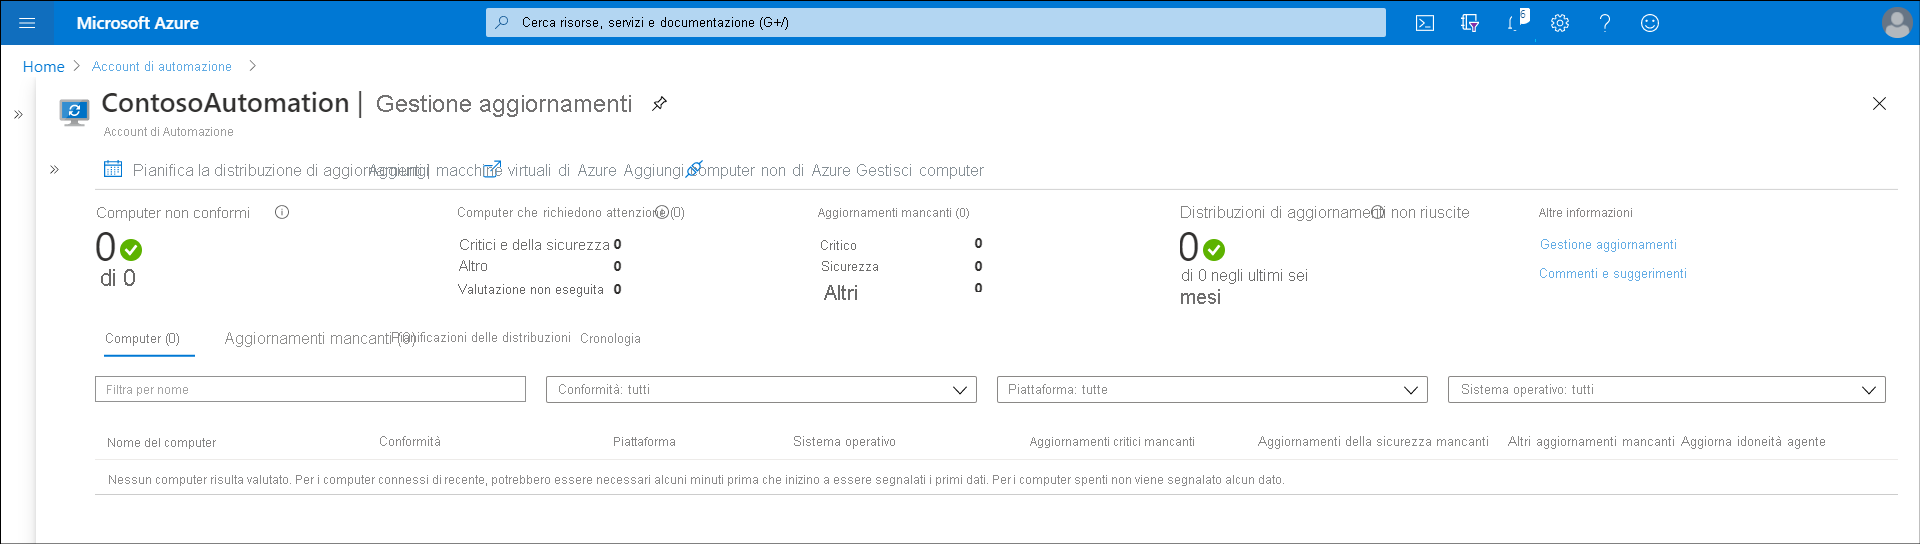 A screenshot of the Update management blade of the Azure portal. The administrator has enabled Update management, but no servers are yet onboarded.